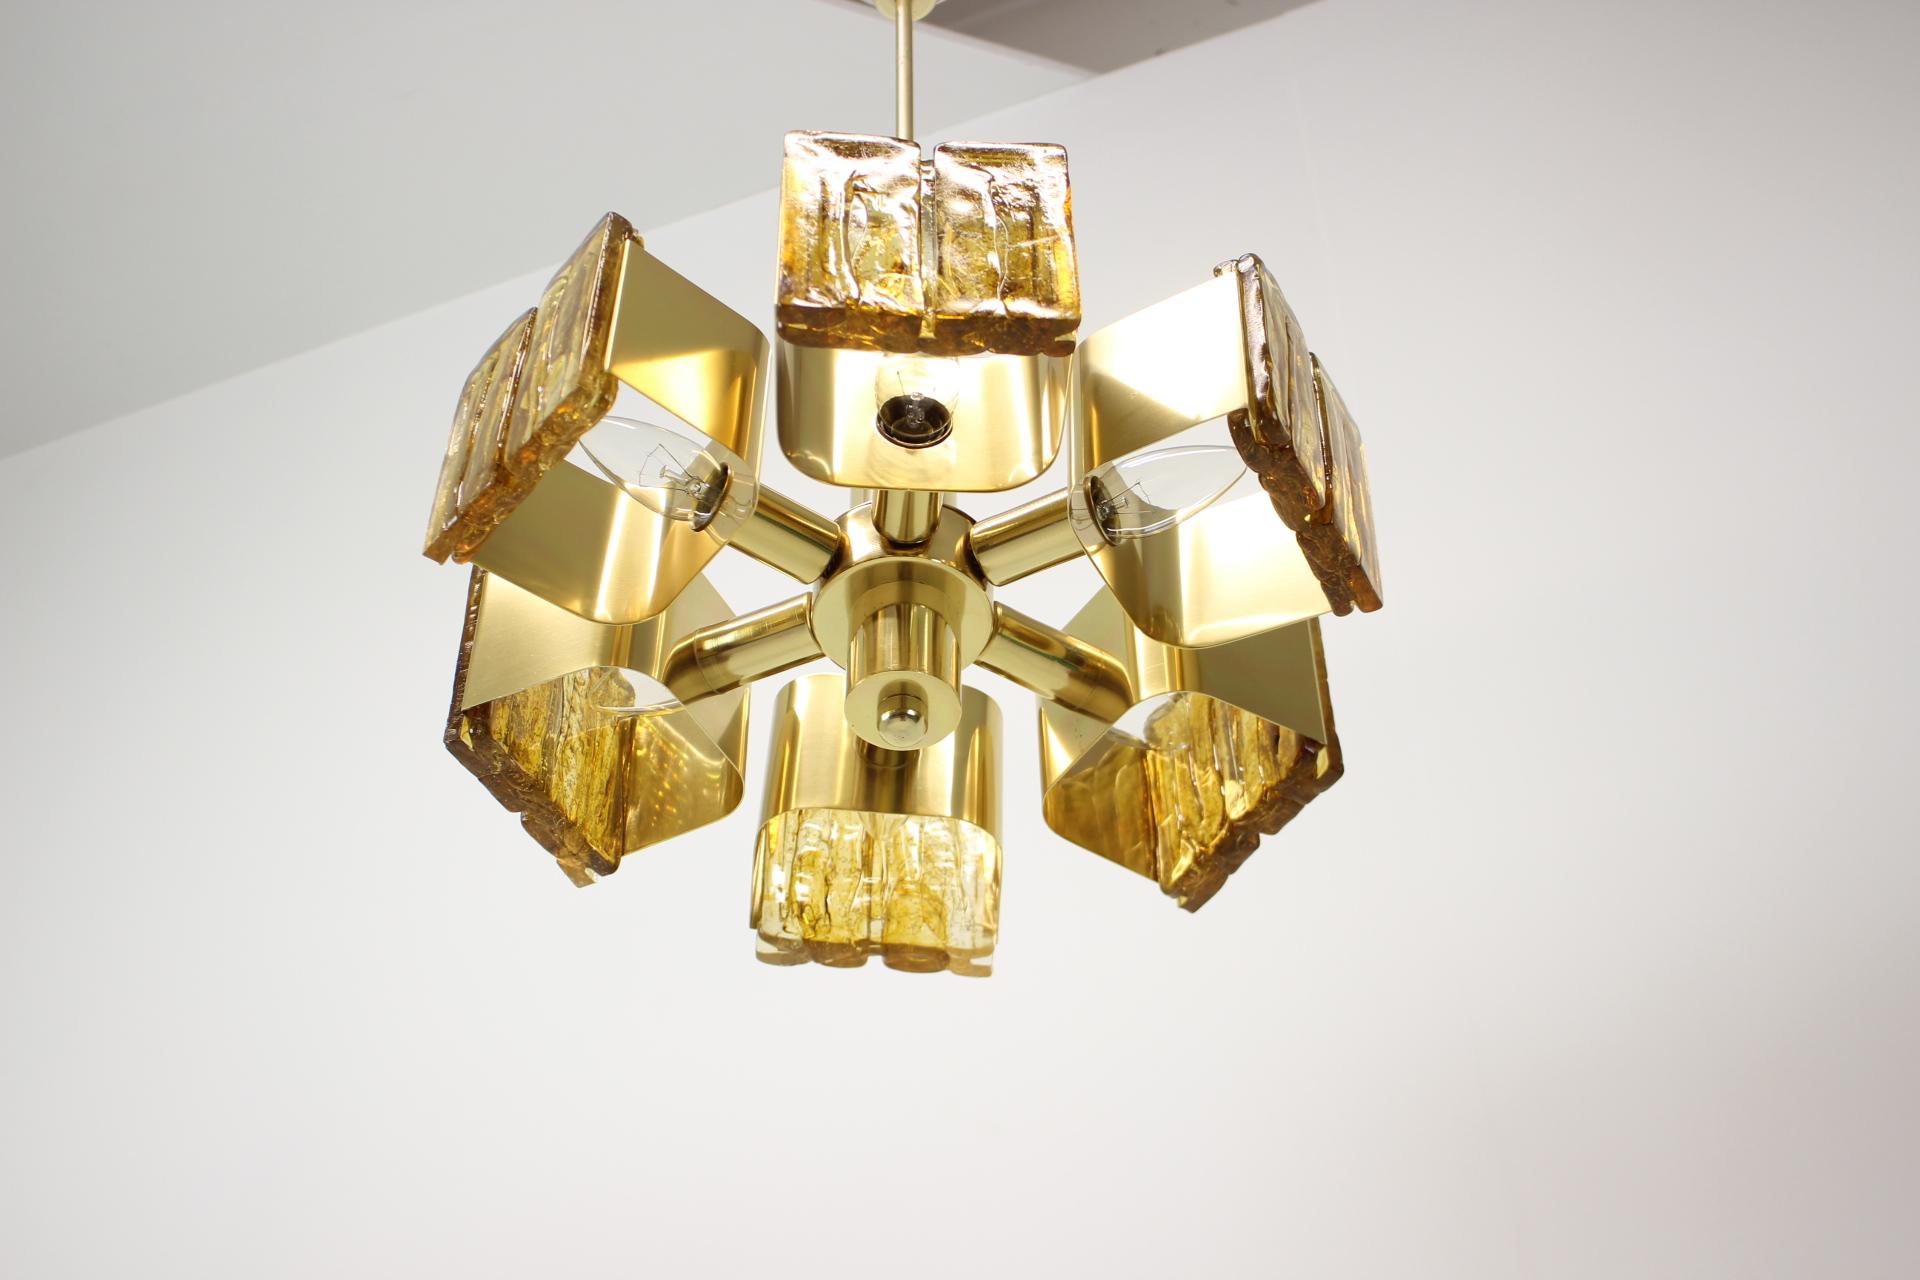 Hungarian Mid-Century Design Brass Chandelier, 1970s Hungary For Sale